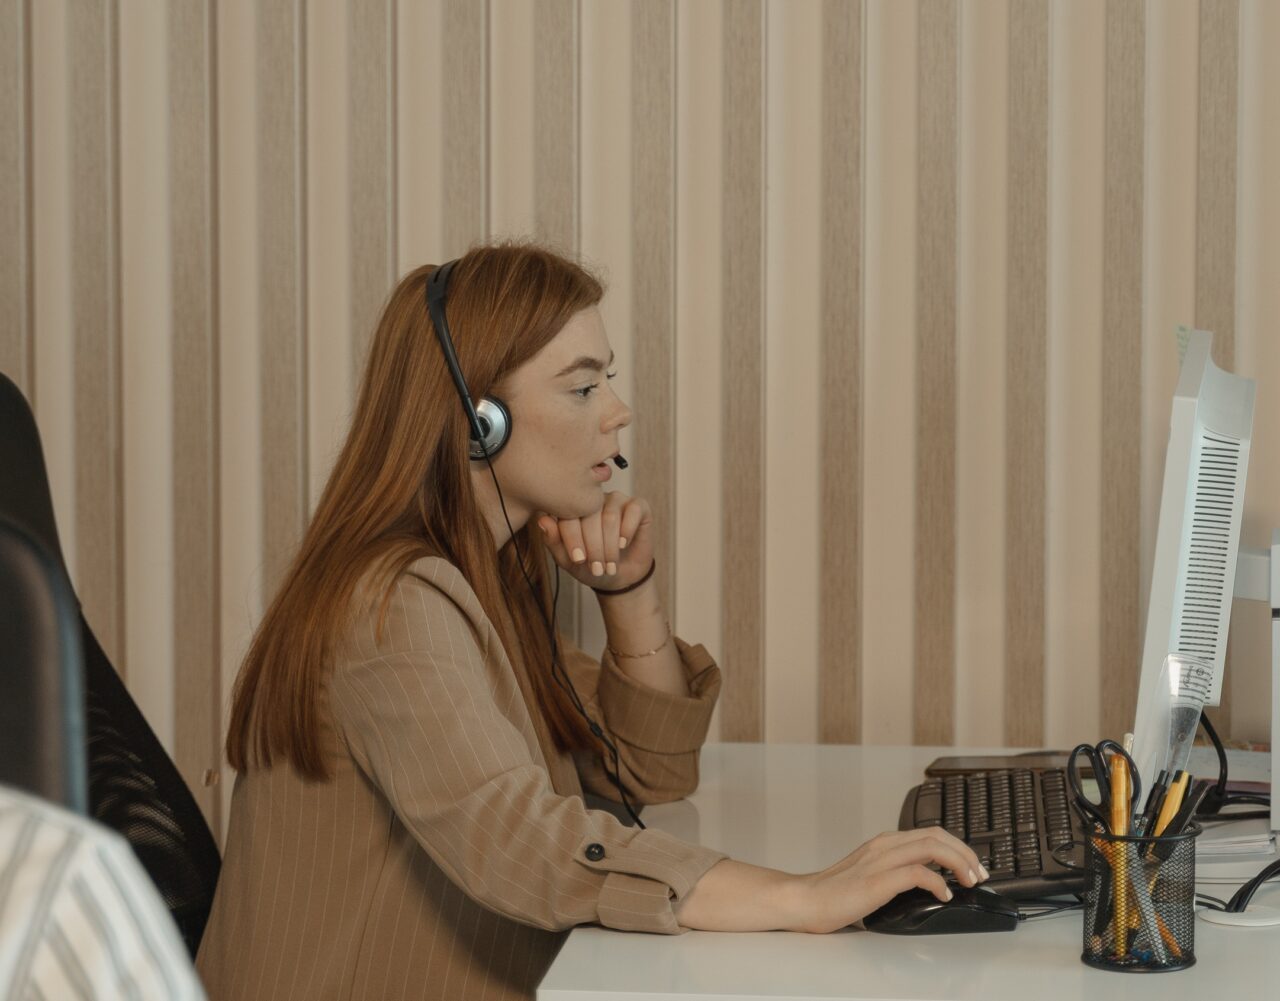 A woman from the contact centre speaks with the customer intending to deliver great CX through improved human experience.